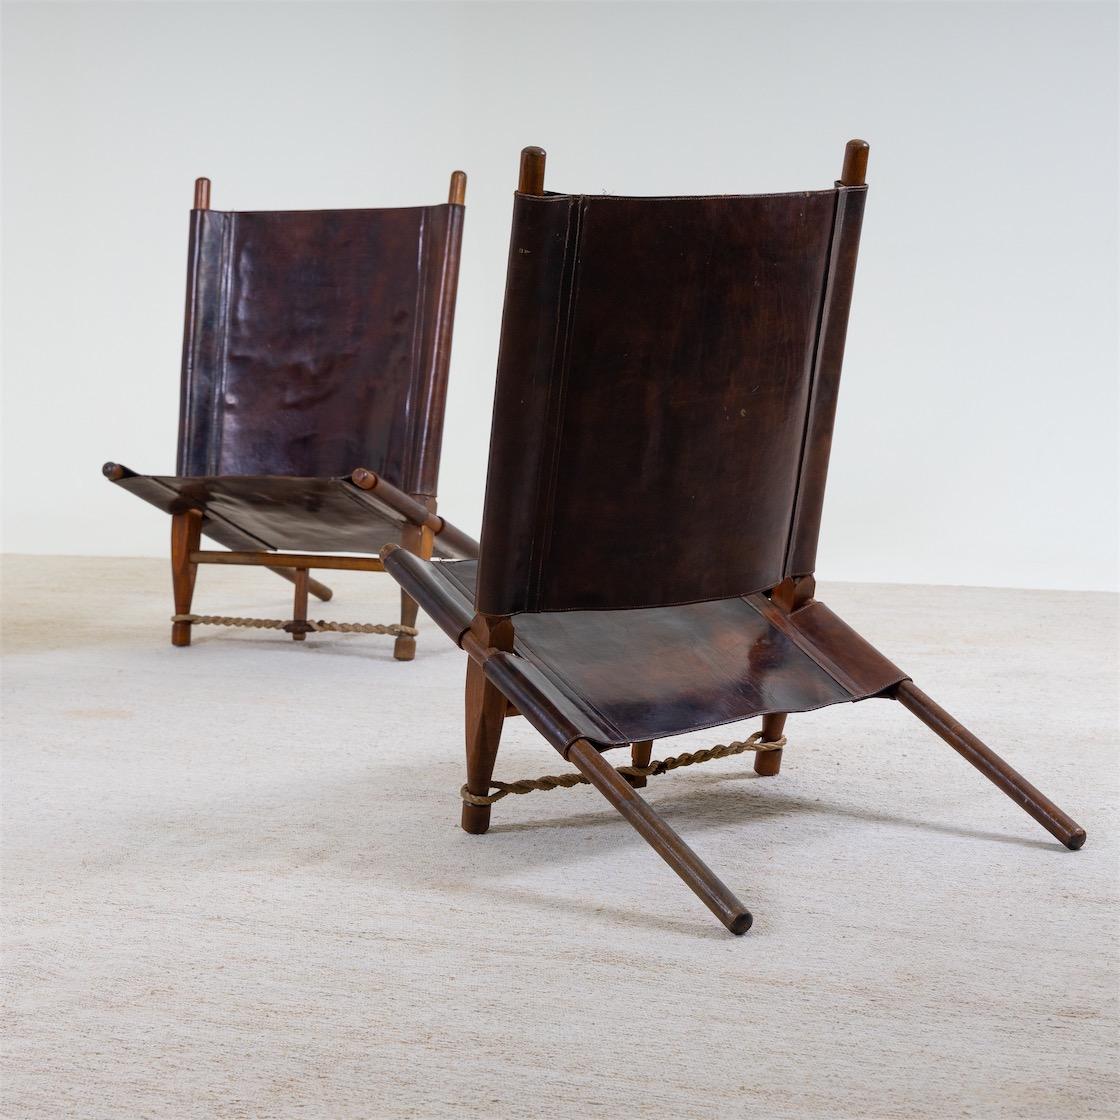 Set of four lounge armchairs with leather seats and backs, designed by Ole Gjerlov-Knudsen for Cado in 1958. One chair is slightly damaged.